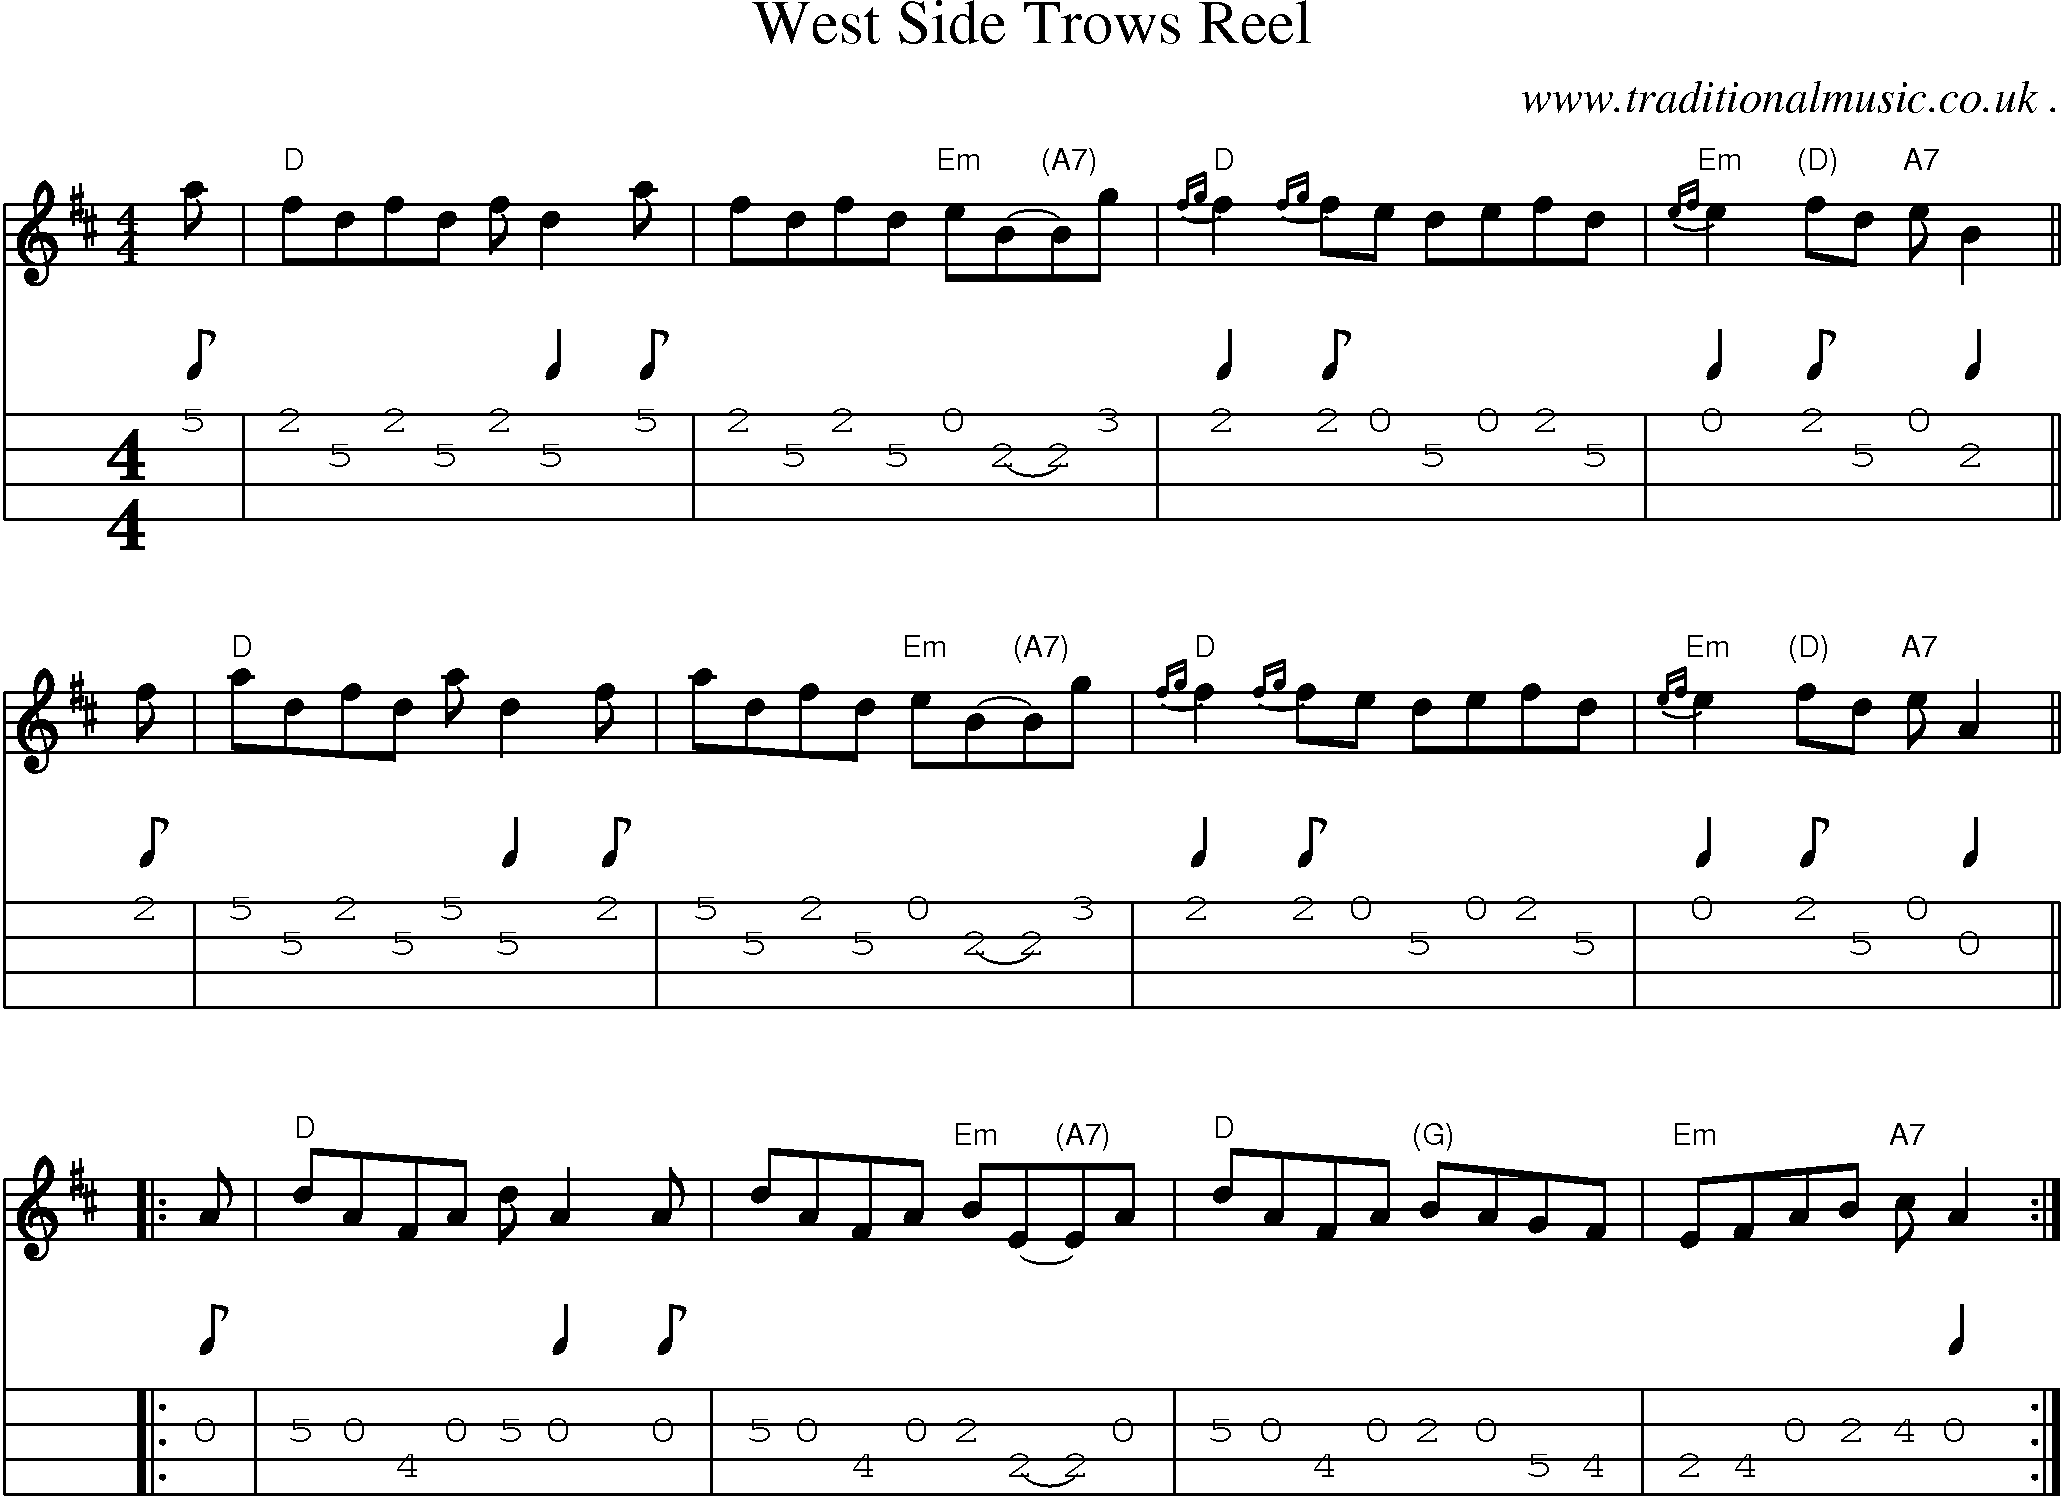 Sheet-music  score, Chords and Mandolin Tabs for West Side Trows Reel